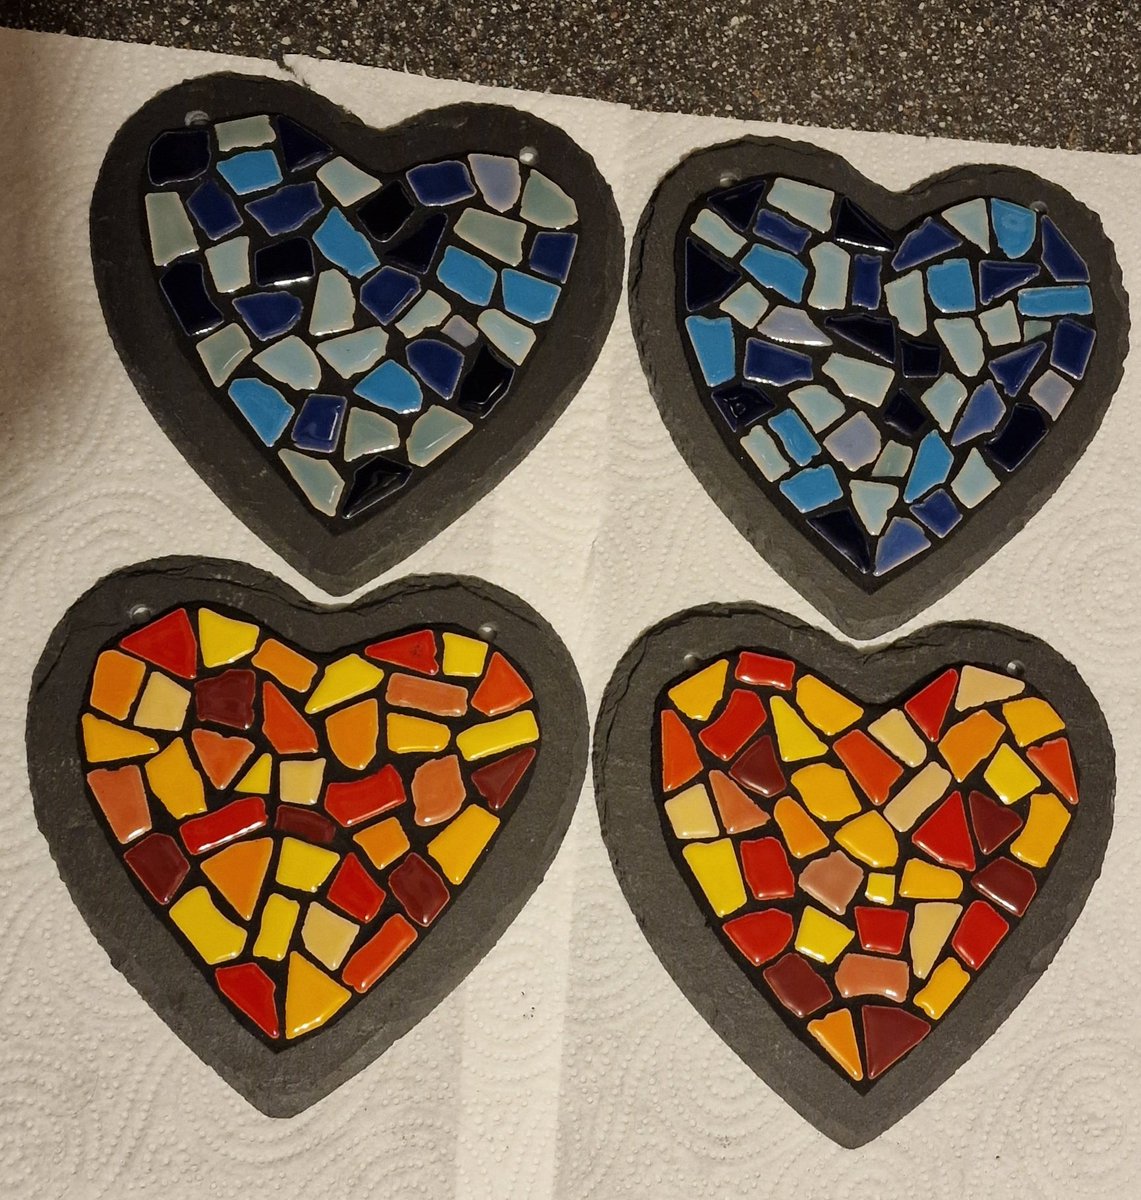 Also in the grouting pile last night...
4 hanging slate hearts.
Do you prefer blue or red? 

#MonchicMosaics #earlybiz #CraftBizParty #mhhsbd #UKMakers #shopindie #giftideas #heartmosaic #uniquegiftideas #valentinesgift #madeincornwall #cornishartist  #love #bemine #loveislove